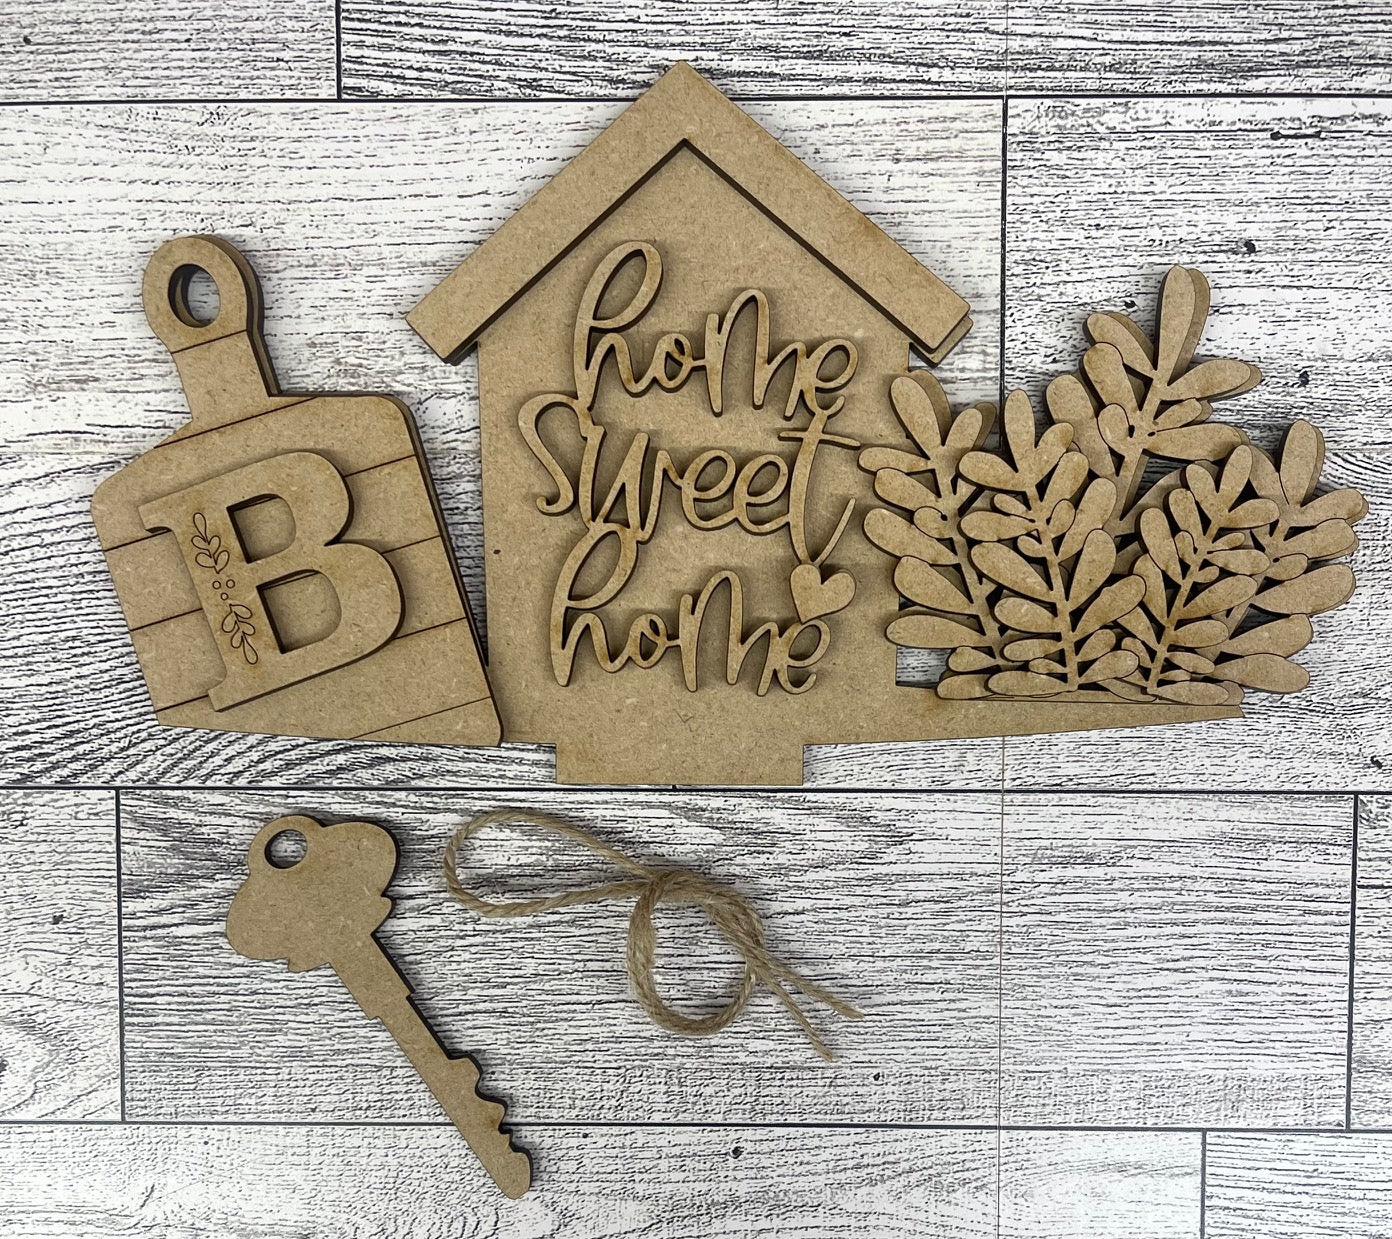 Home Sweet Home Insert only or with basket - unpainted wooden cutouts, ready for you to paint